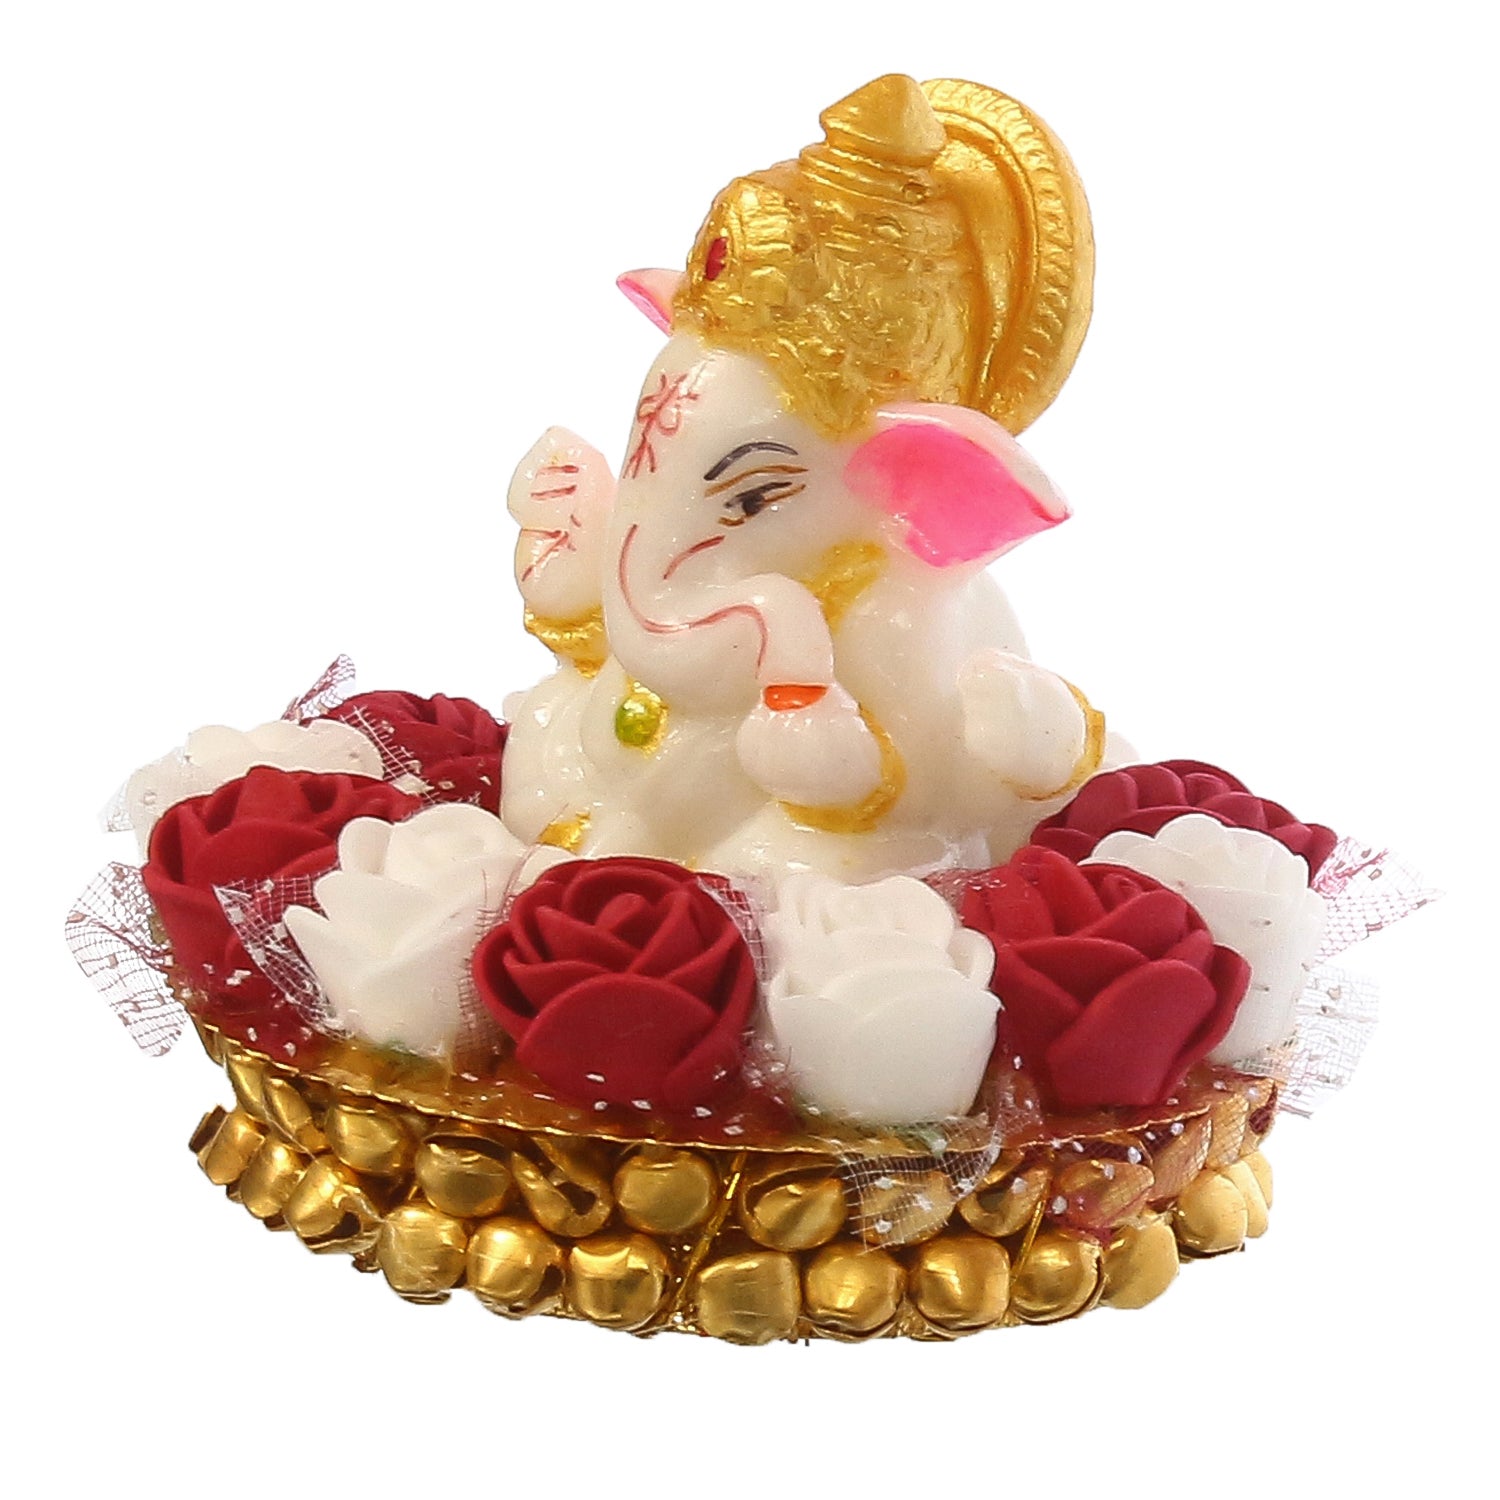 Golden and White Polyresin Lord Ganesha Idol on Decorative Handcrafted Plate with Red and White Flowers 5